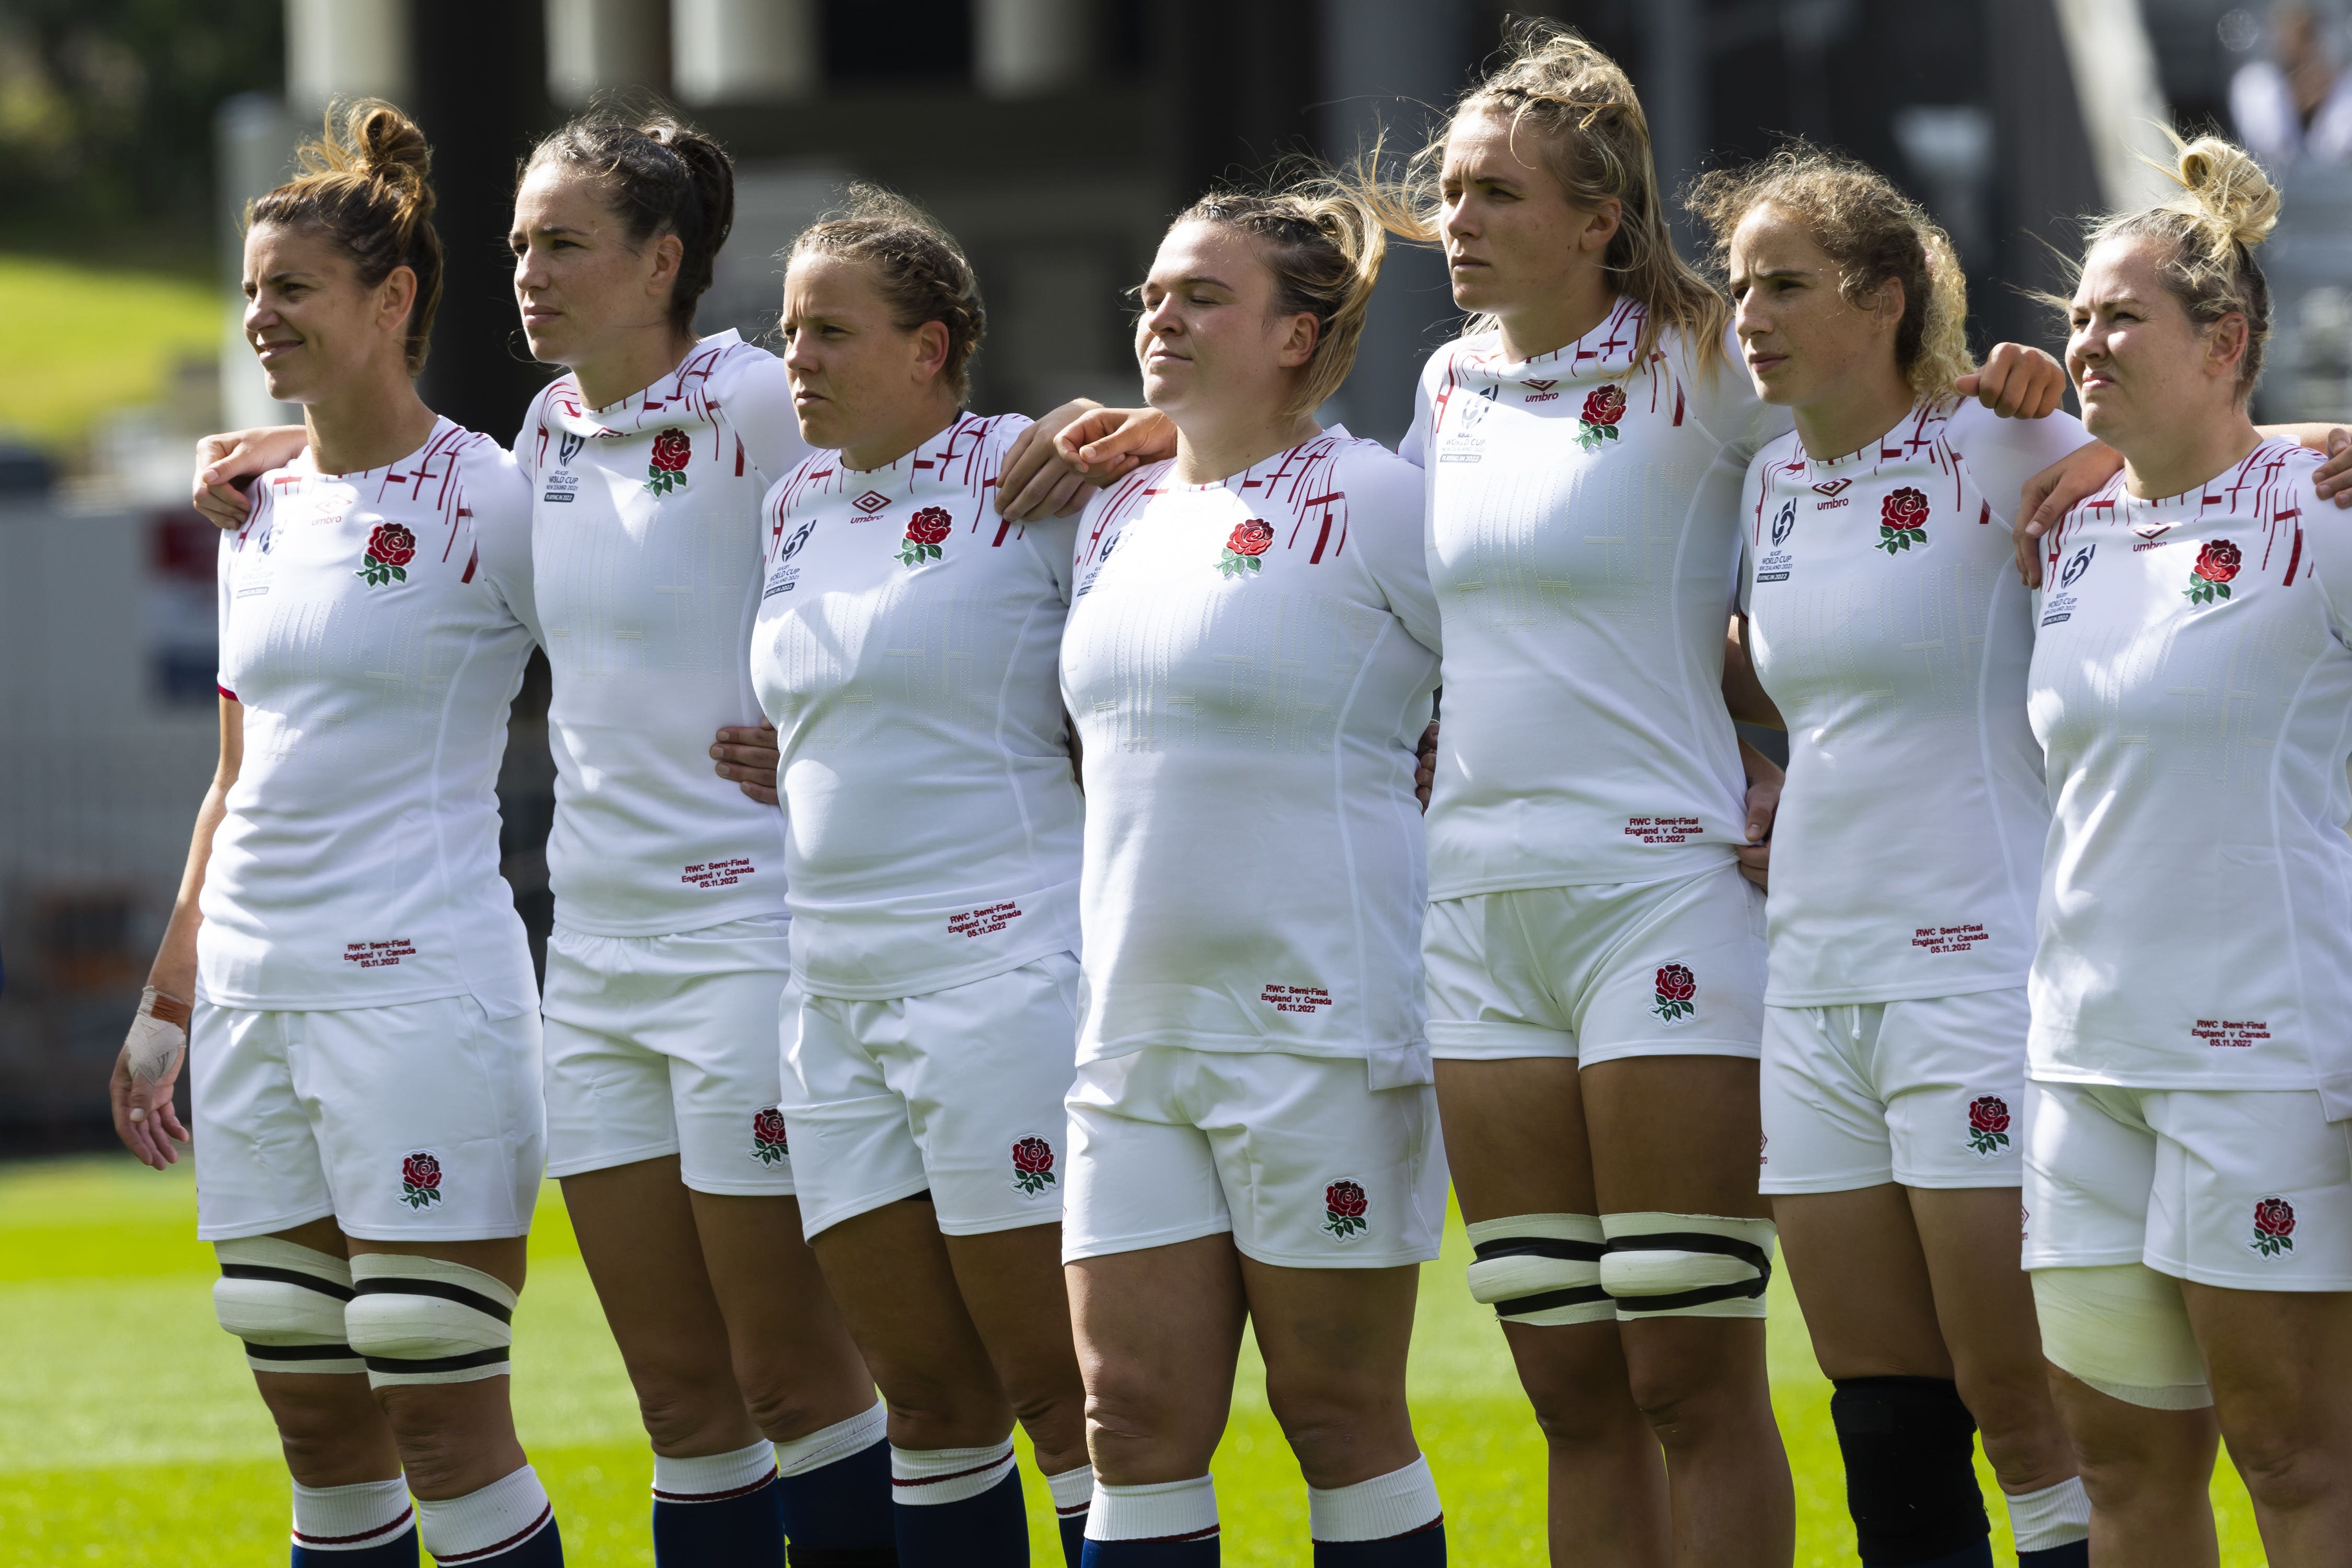 England will play New Zealand for the World Cup trophy on Saturday